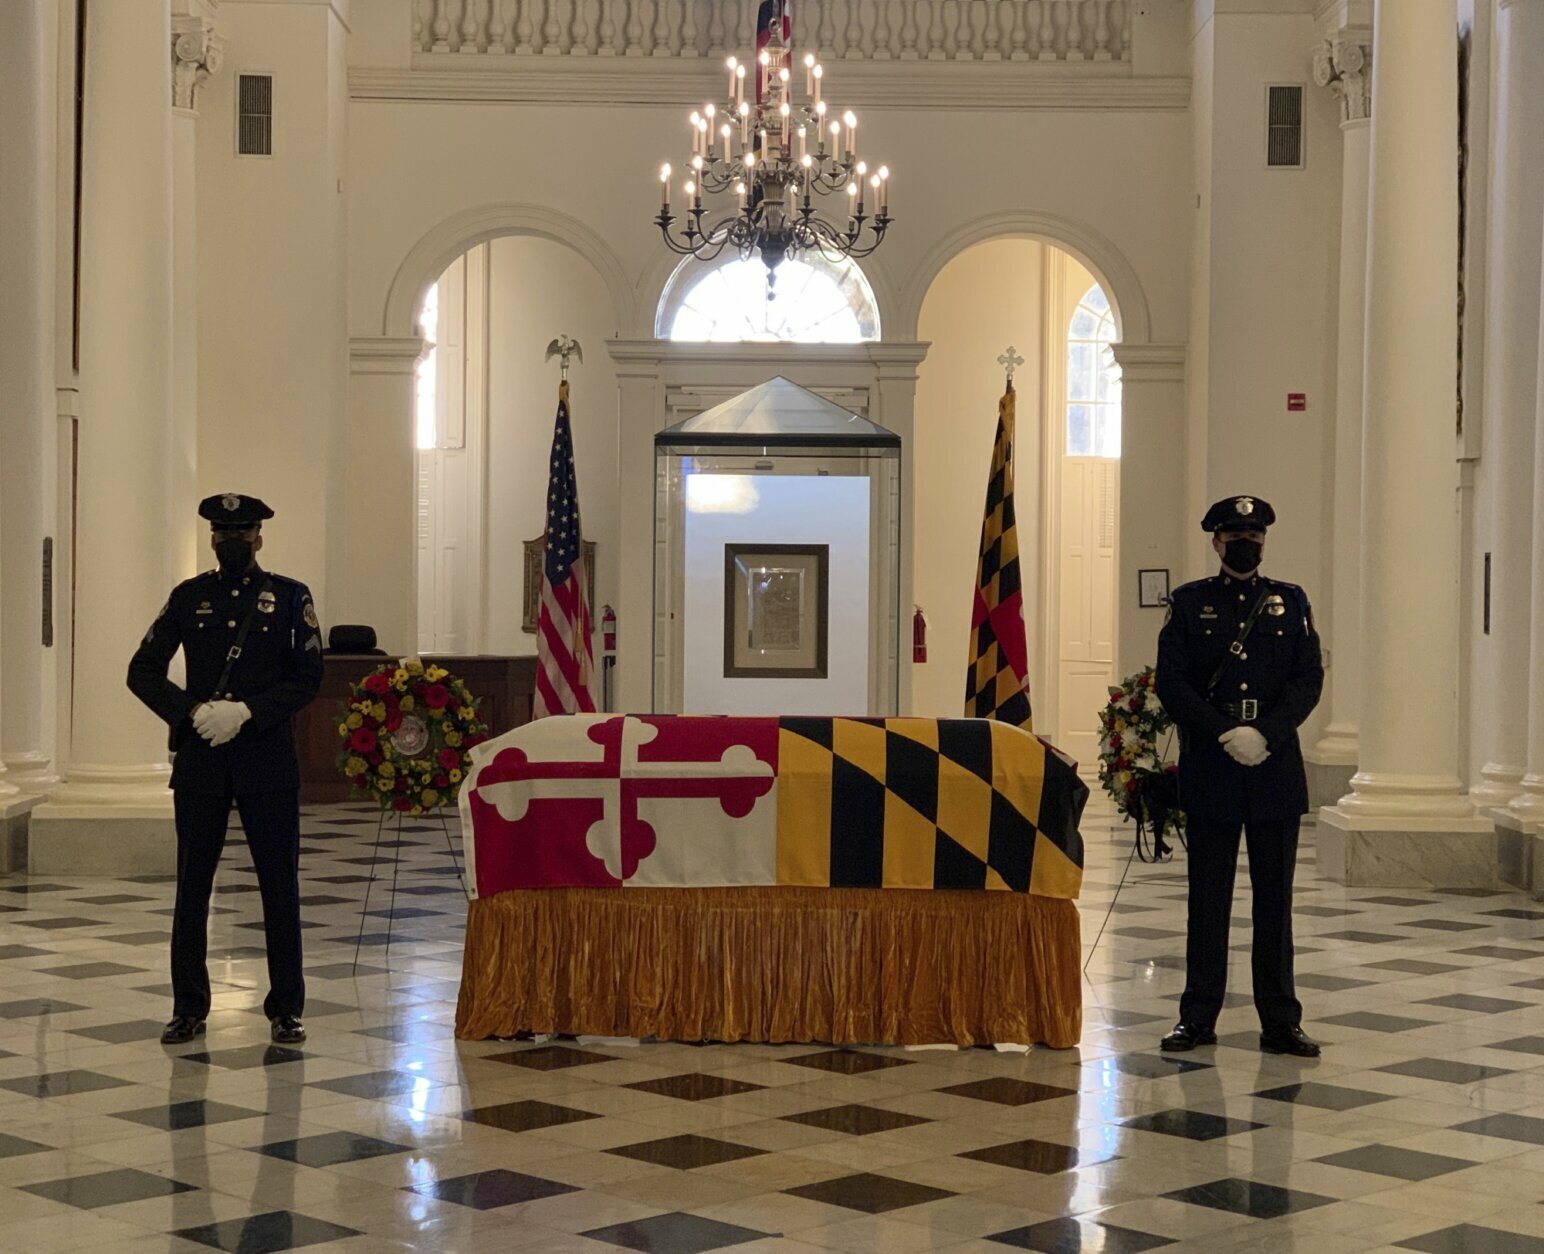 Maryland Senate President Emeritus Thomas V. Mike Miller, Jr. lies in state at the Maryland Statehouse in Annapolis, Md., on Friday, Jan. 22, 2021.  Miller was a state legislator for 50 years. A Democrat, he served as president of the Maryland Senate for 33 years. He announced he was stepping down from the post in 2019, but he remained a senator until December. (Bill O'Leary/The Washington Post via AP, Pool)